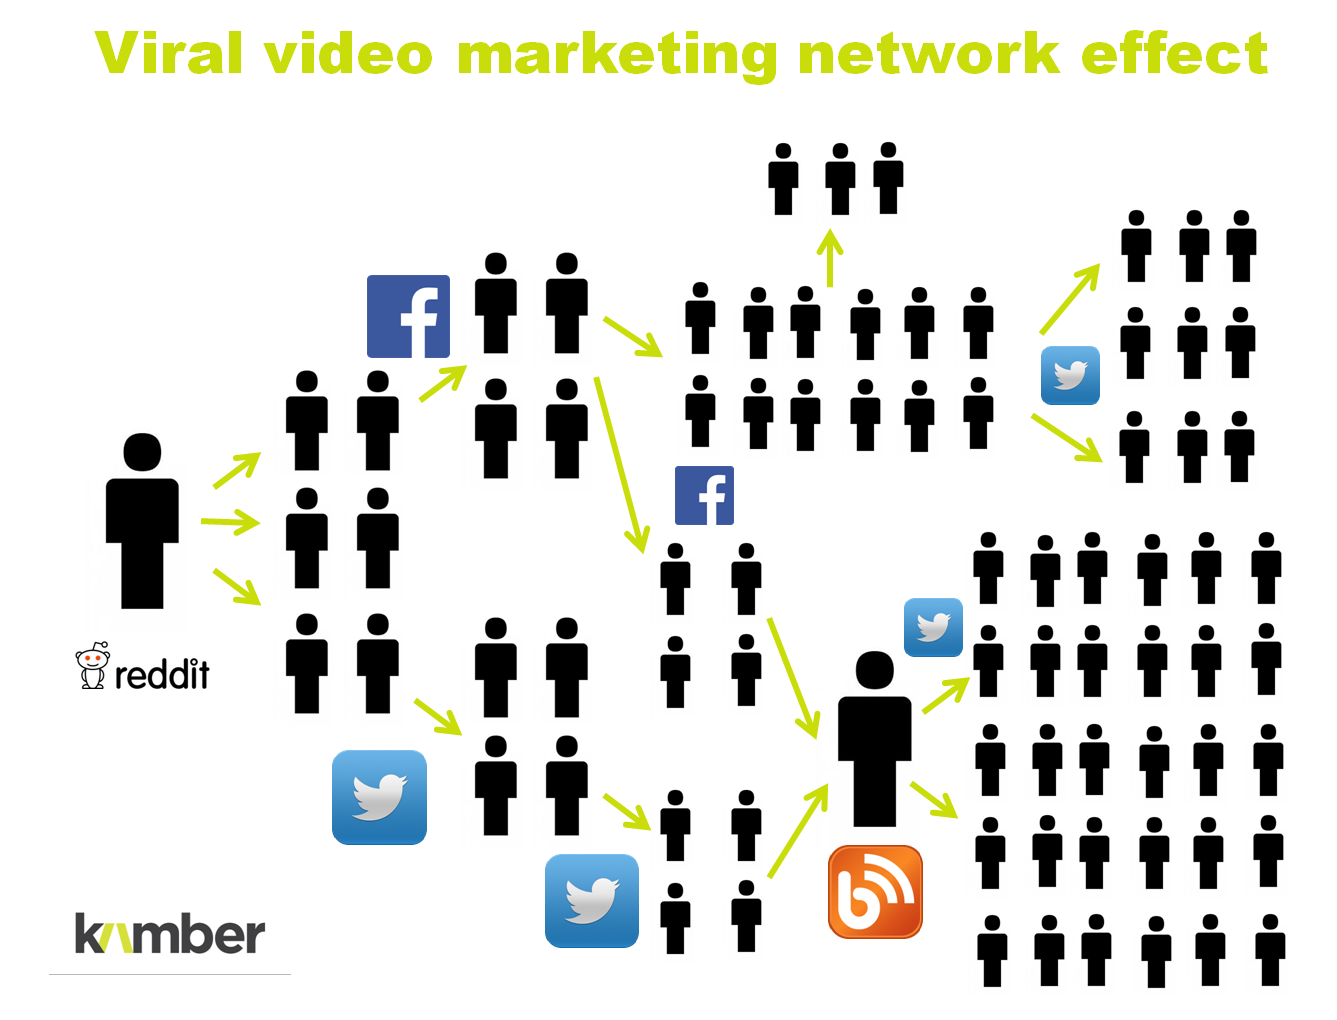 Viral-video-marketing-network-effect.png